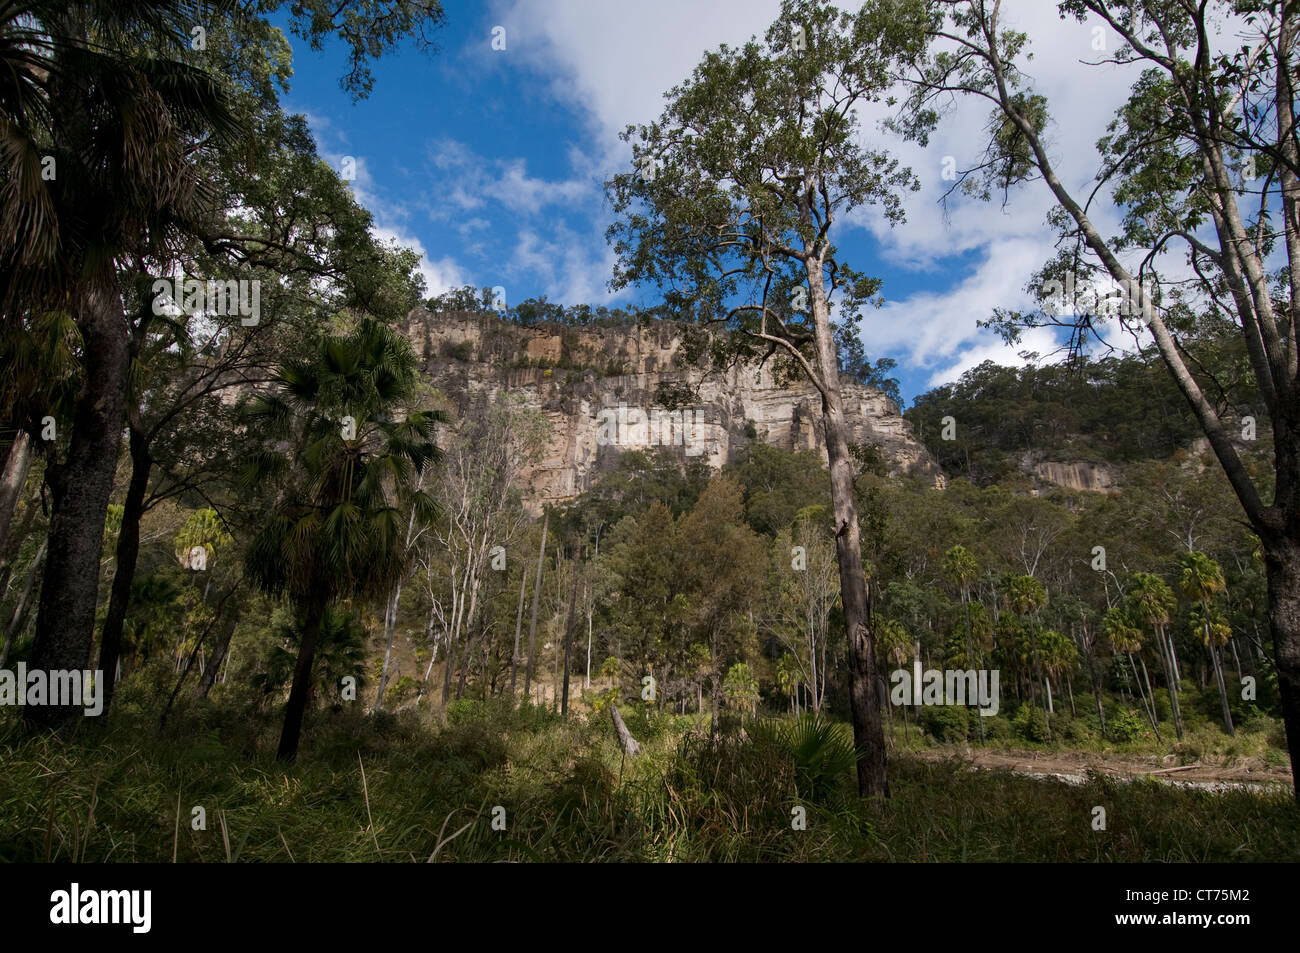 The white cliffs and the rain forest in the Carnarvon Gorge National Park in the central highlands of Queensland, Australia Stock Photo